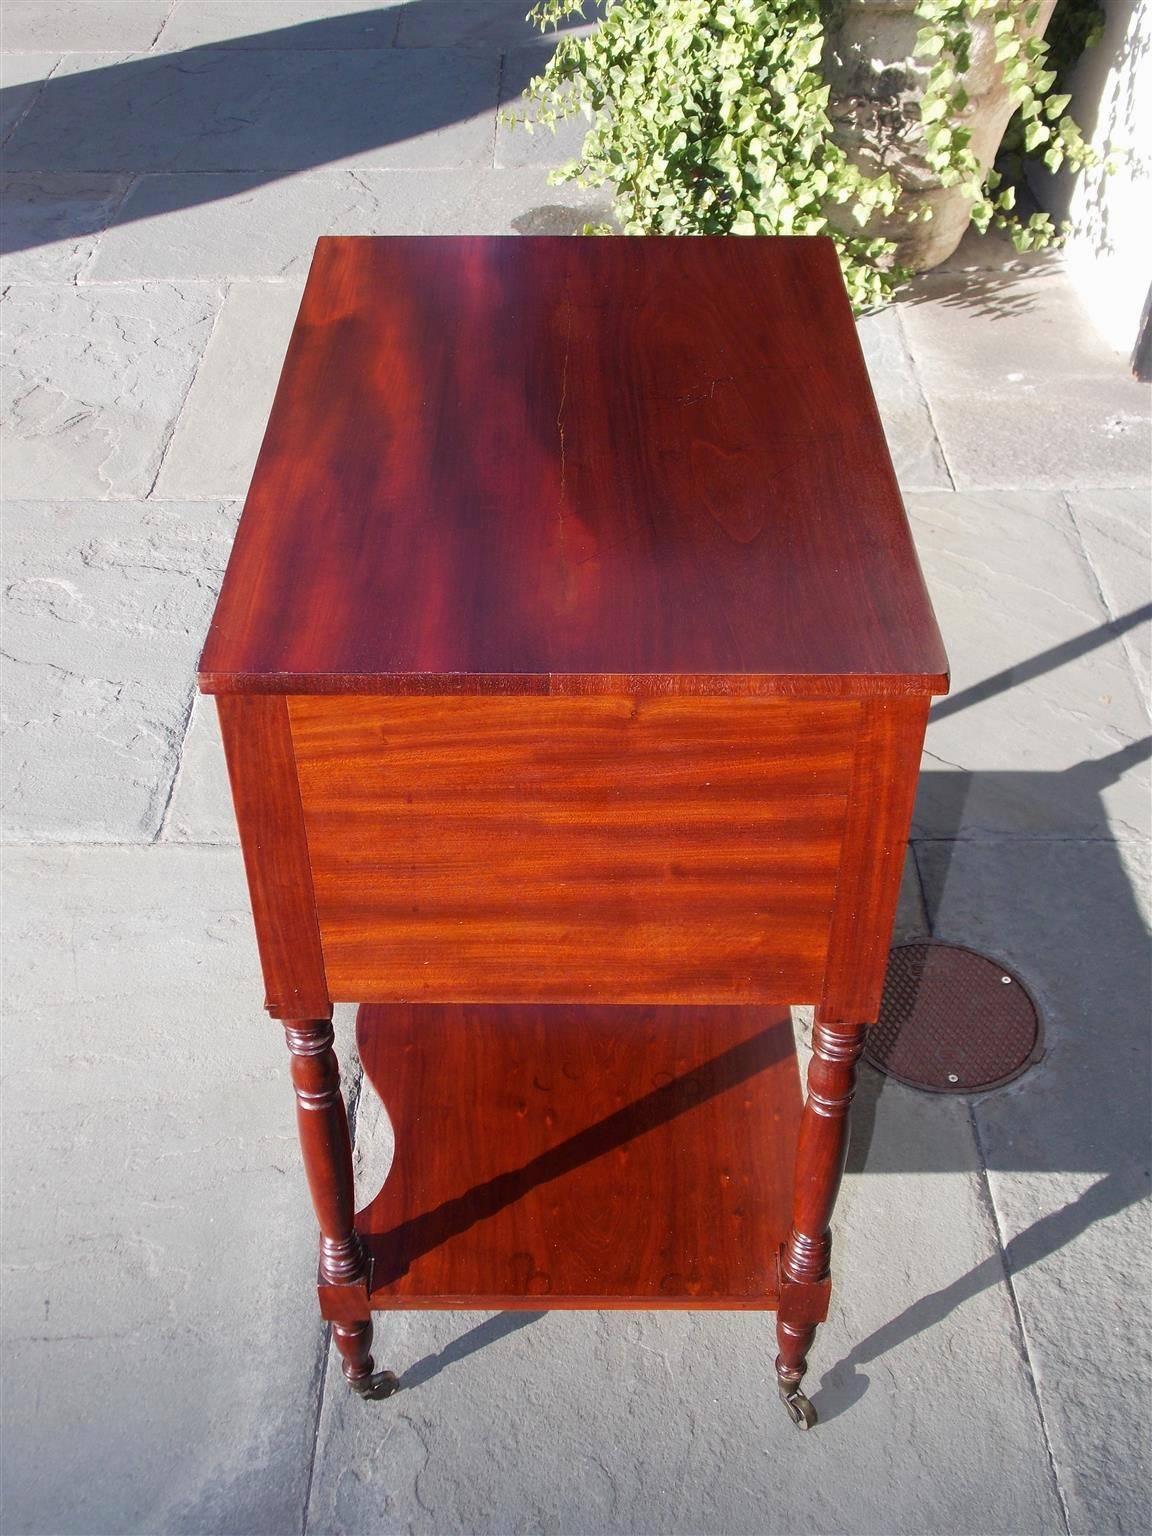 Hand-Carved American Sheraton Mahogany Work Table with Fitted Interior Desk, Circa 1815